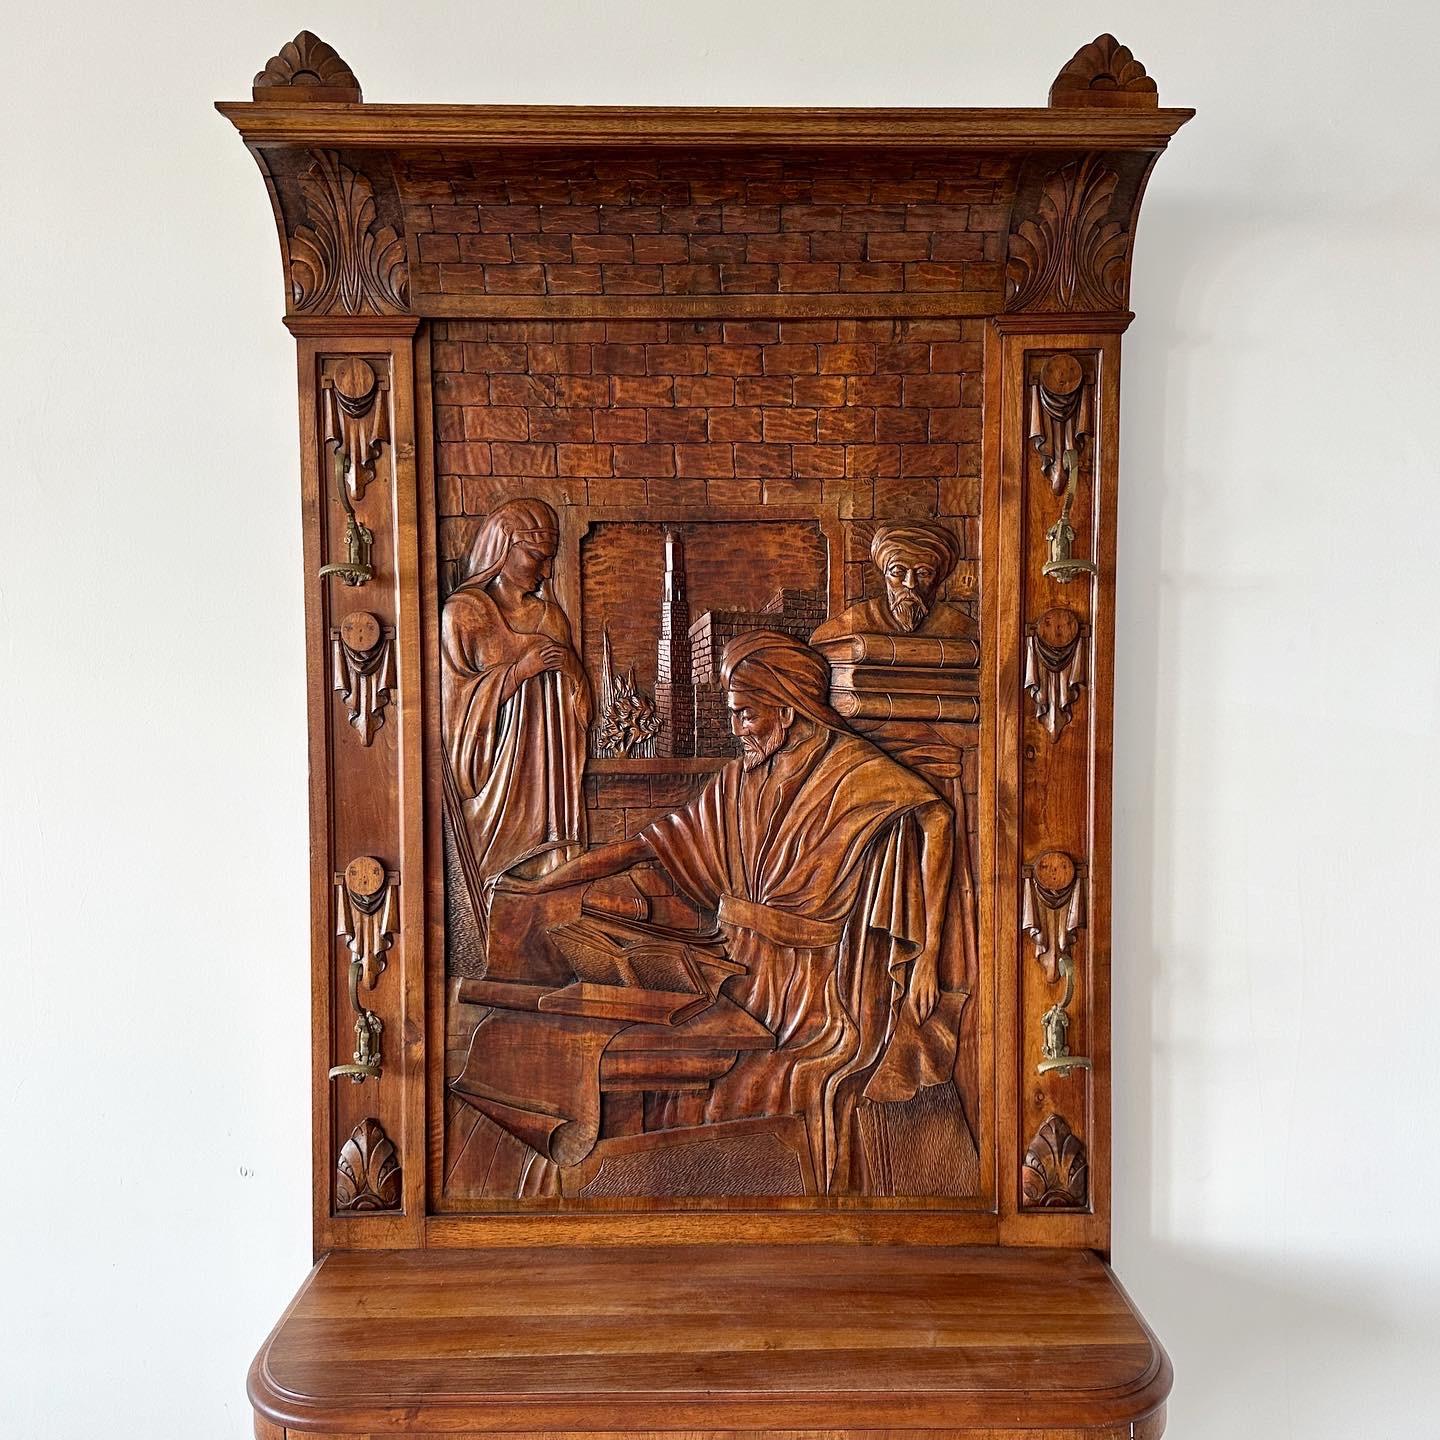 Sculptural carved oak hall tree with four coat hooks and a large waist-height shelf. Not exactly sure what scene is depicted, possibly something Tower of Babel related, maybe Muhammad ibn Musa al-Khwarizmi, the Persian astronomer and mathematician.